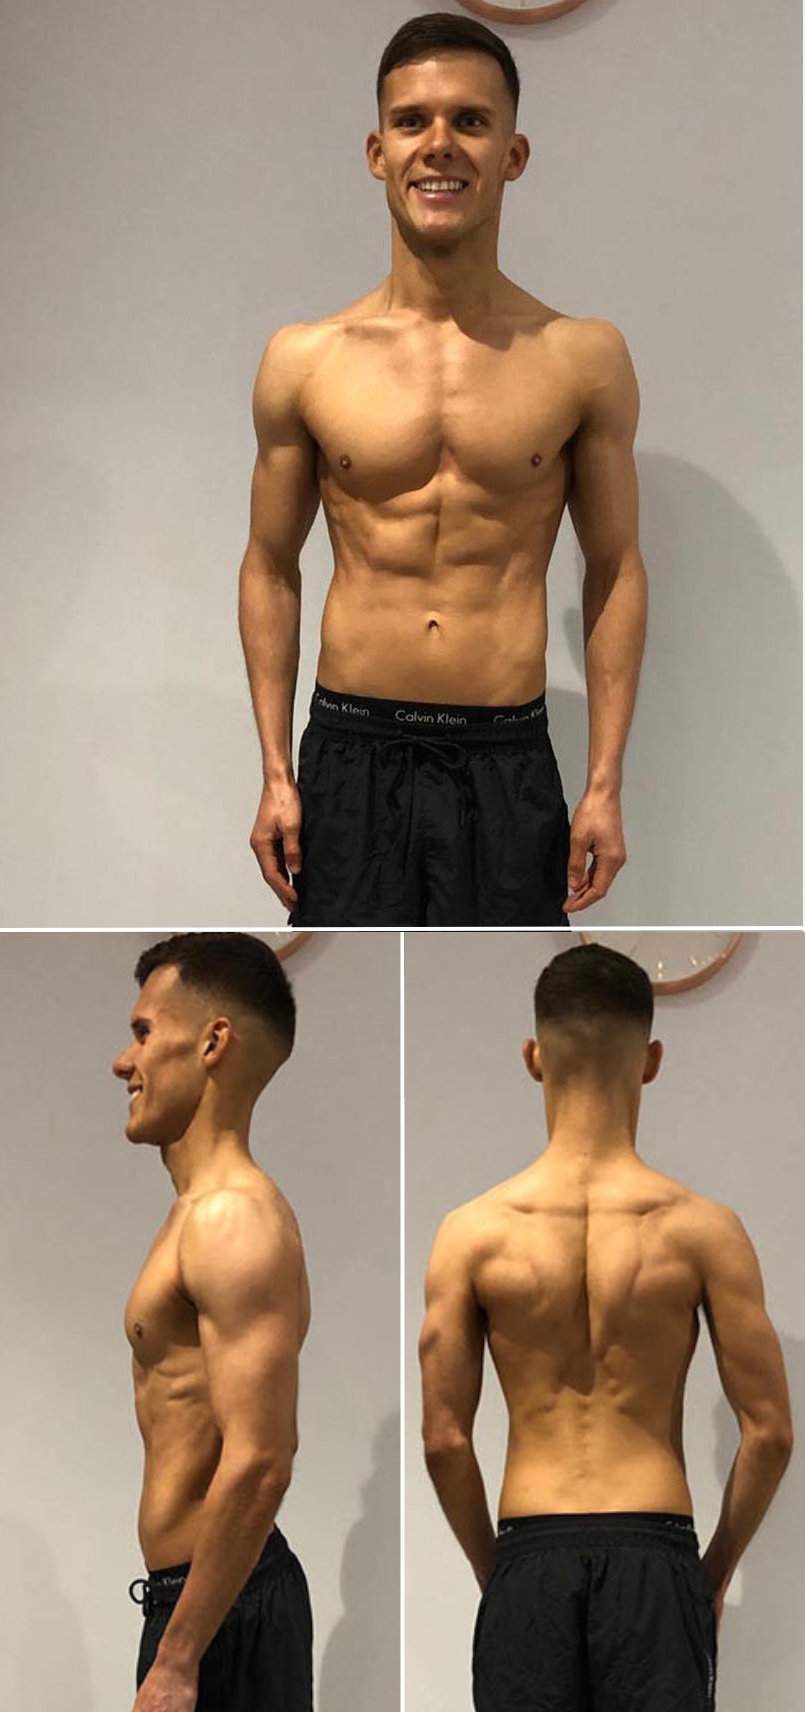 Sam's after RELOAD group personal training transformation